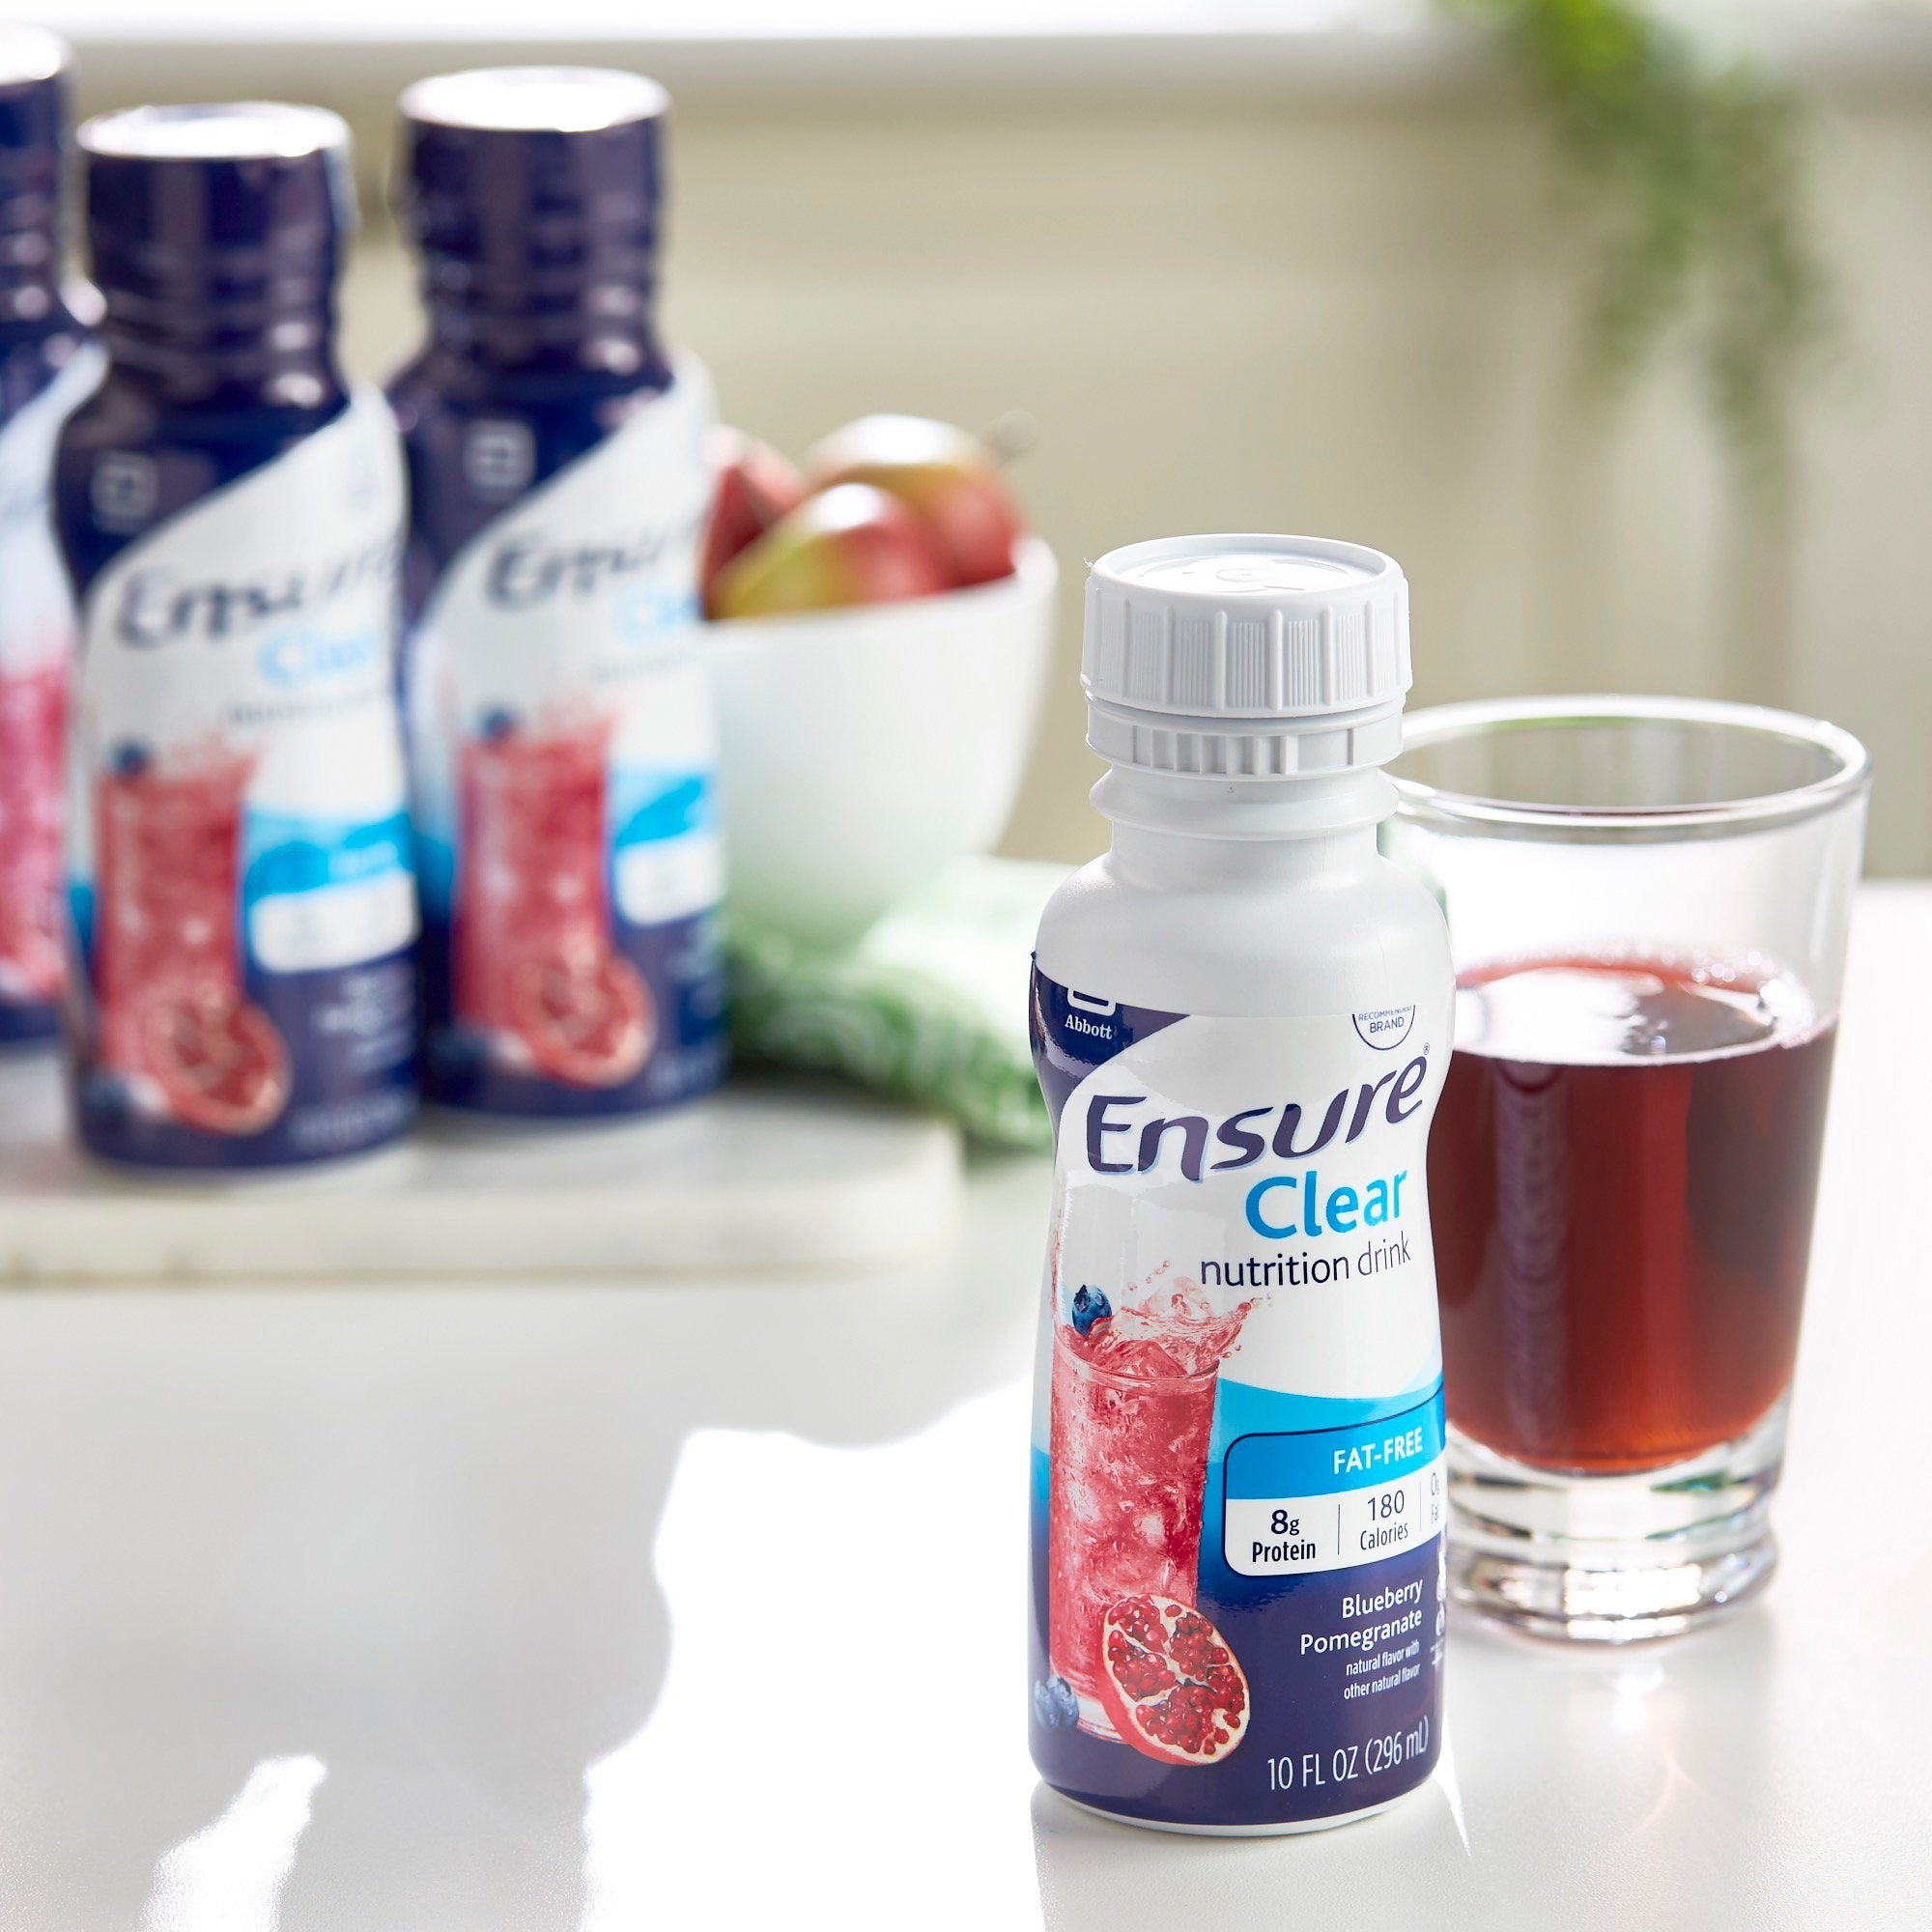 Ensure Clear Nutrition Drink Mixed Fruit - 4 CT Ensure(70074624815):  customers reviews @